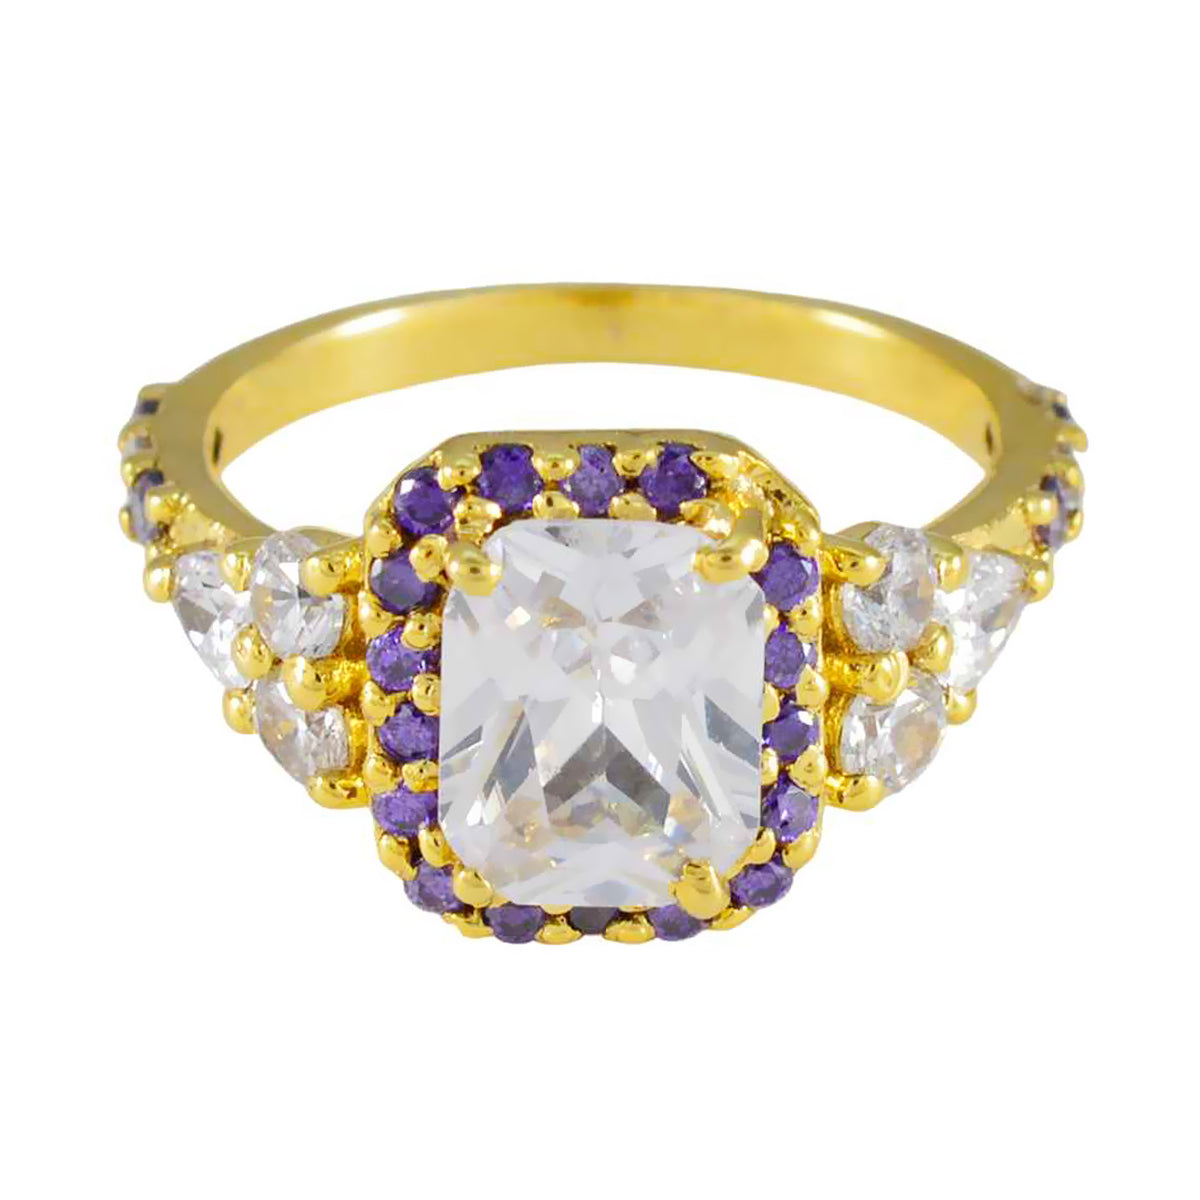 Riyo Best Silver Ring With Yellow Gold Plating Amethyst Stone Octagon Shape Prong Setting Antique Jewelry Cocktail Ring